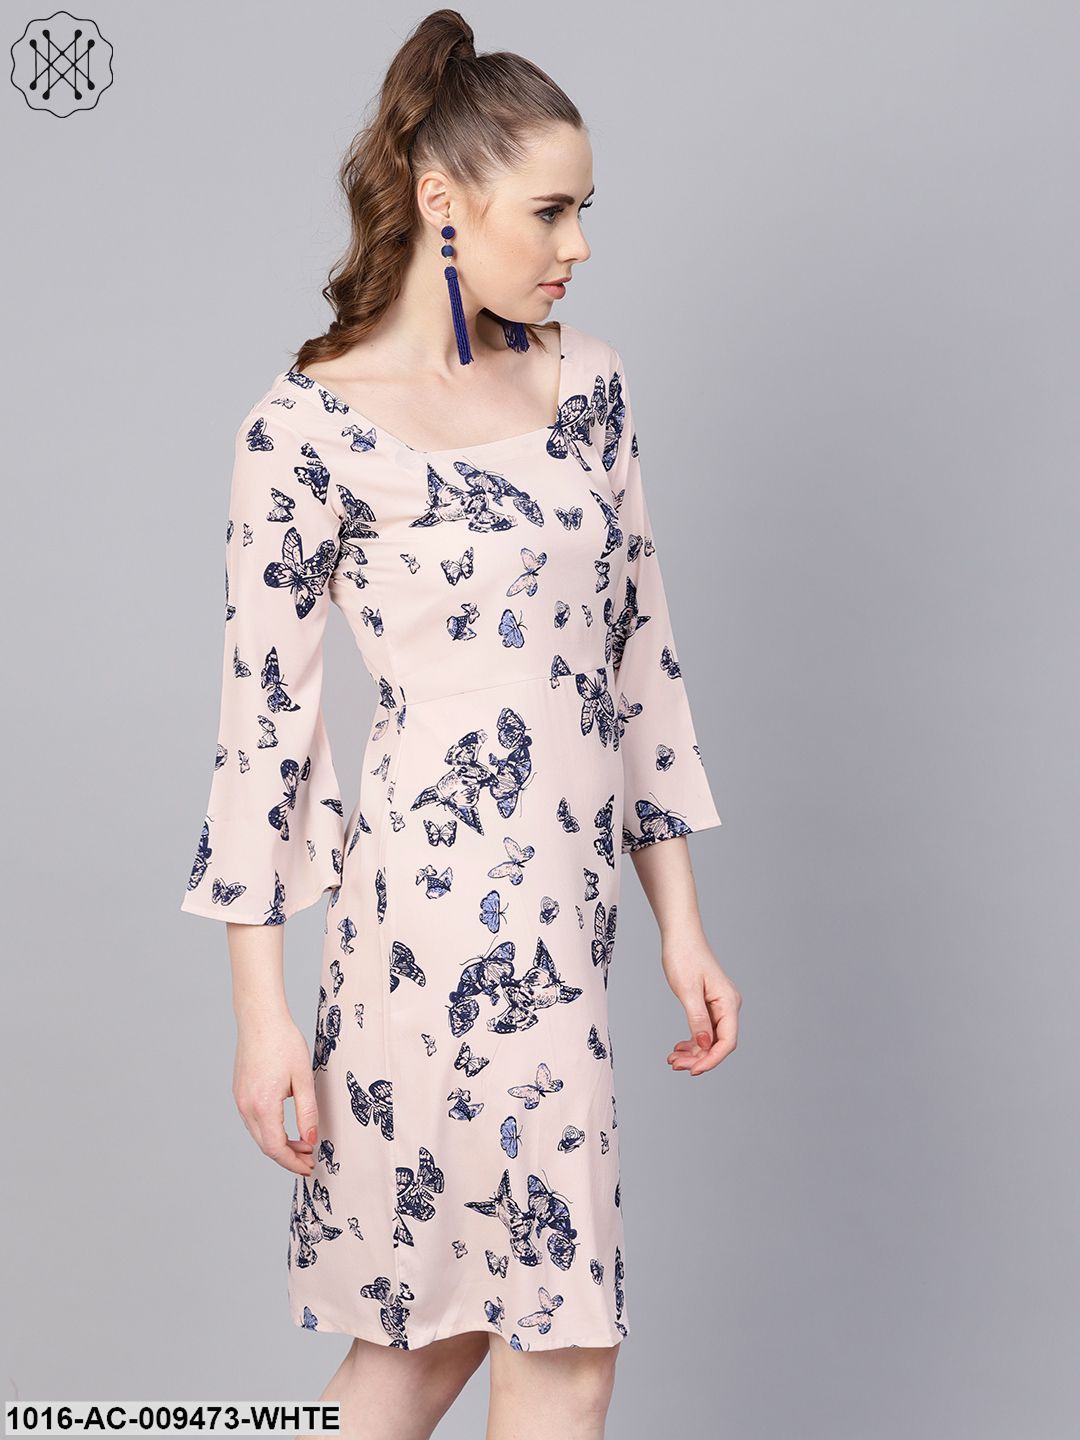 White Butterfly Printed Dress With Square Neck